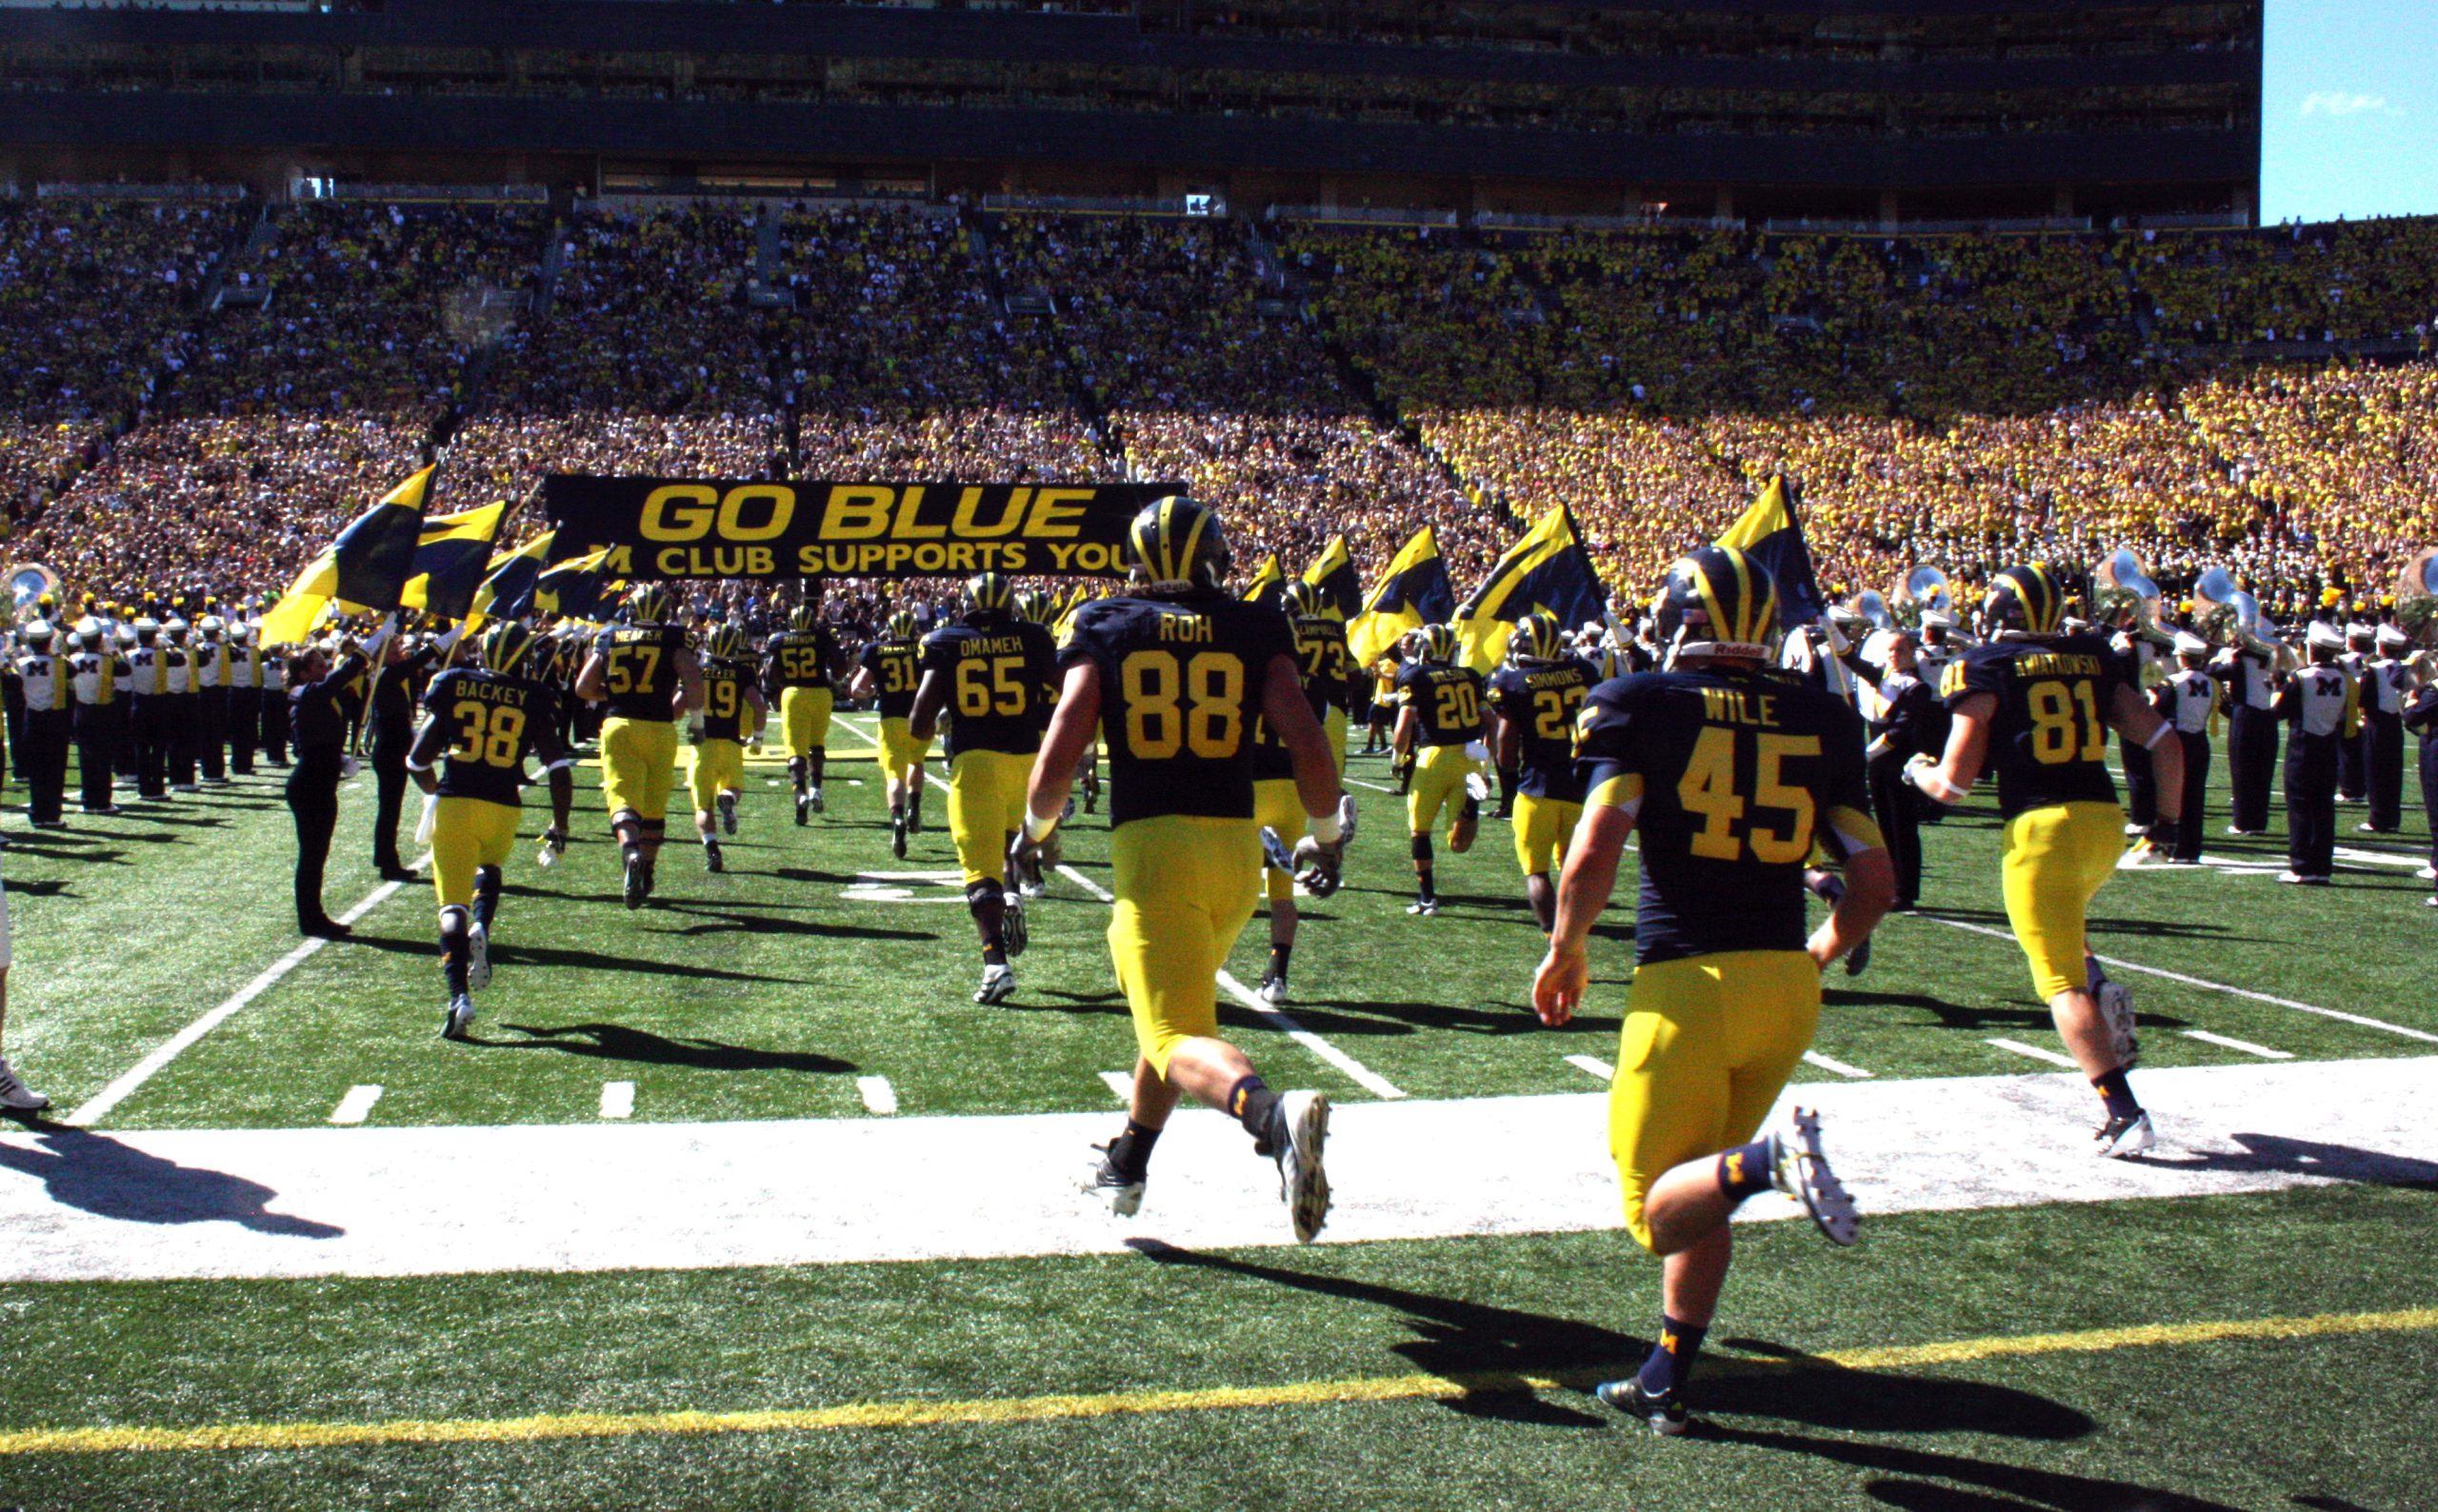 The Michigan Wolverines football team running onto the field before the game.